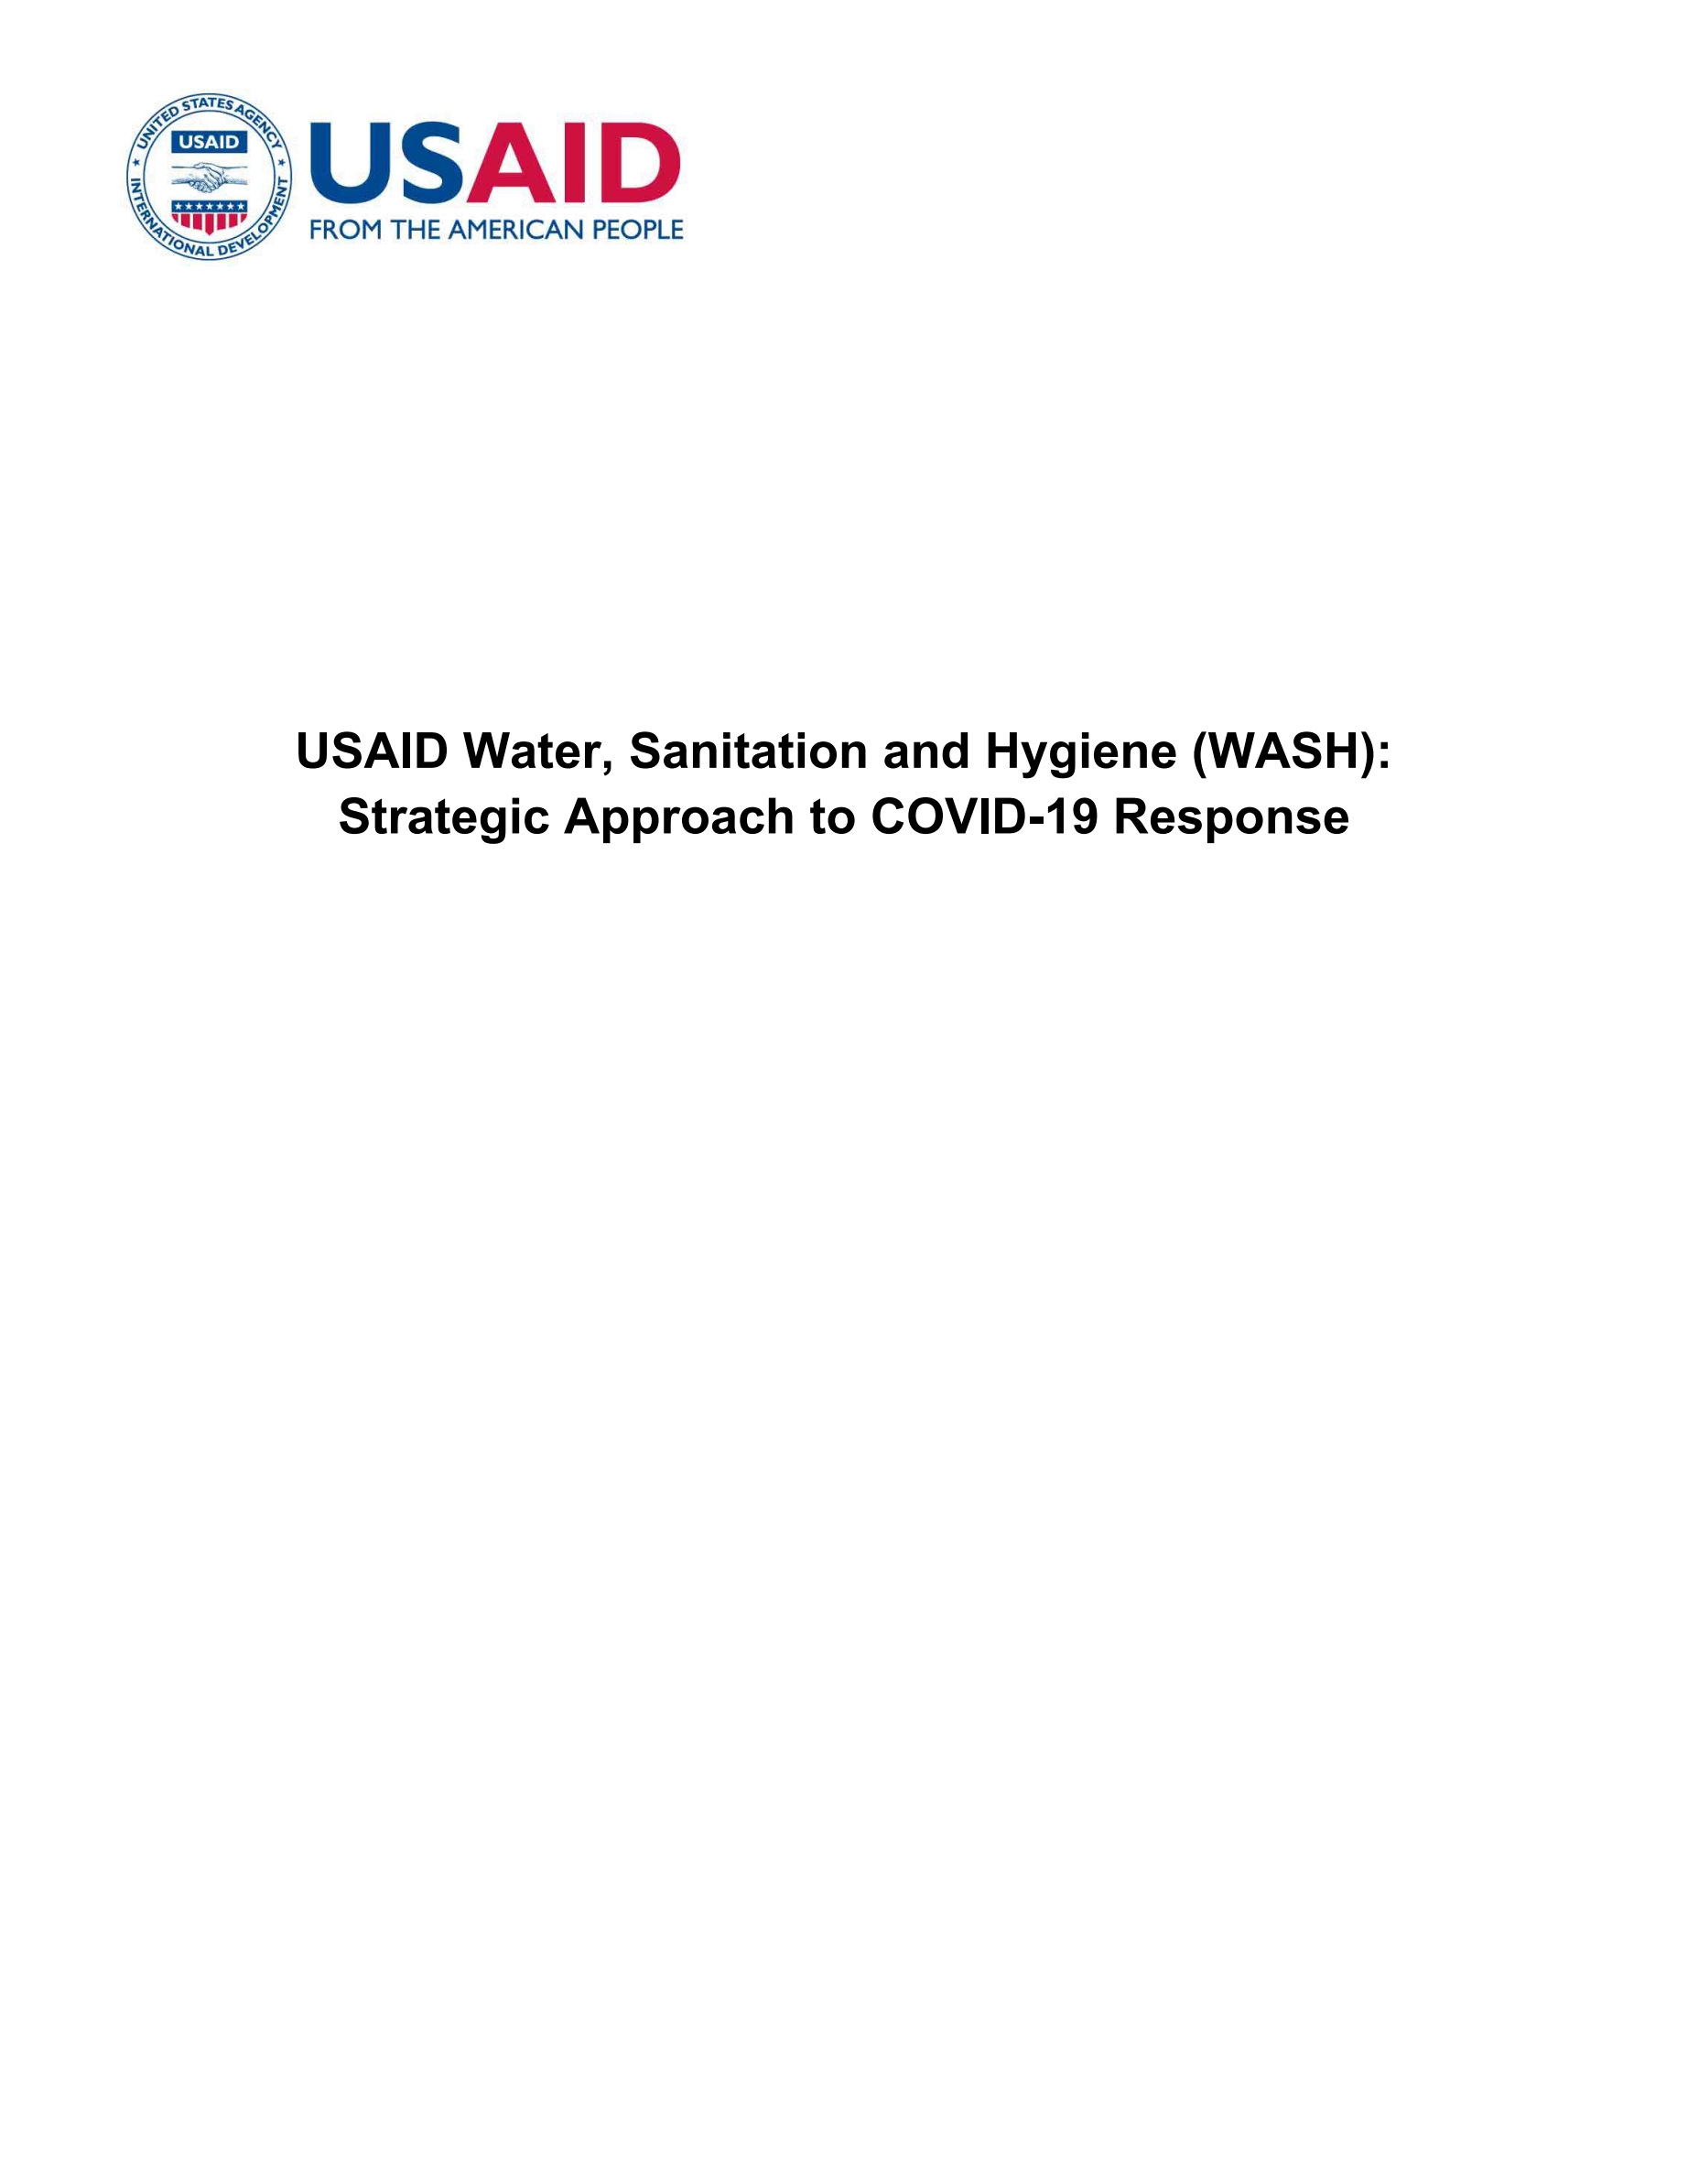 final_external_usaid_wash_strategic_approach_to_covid